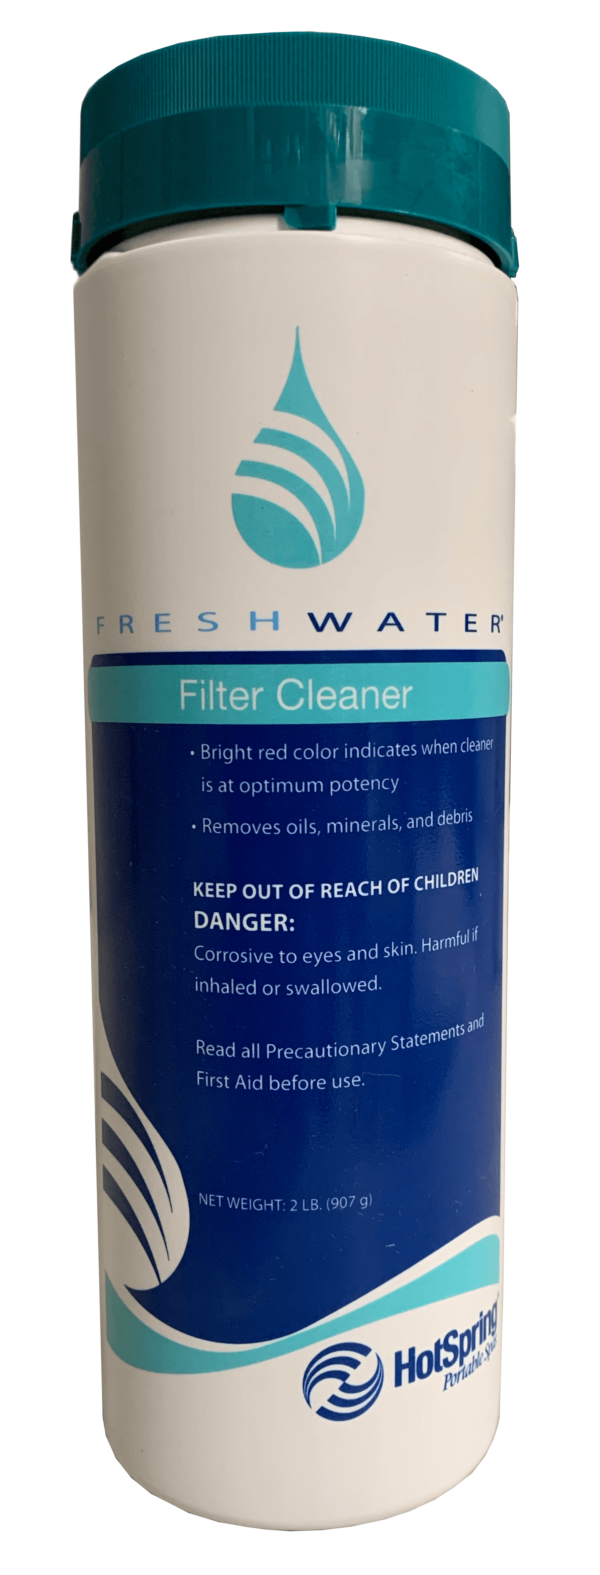 Freshwater Filter Cleaner 2lbs